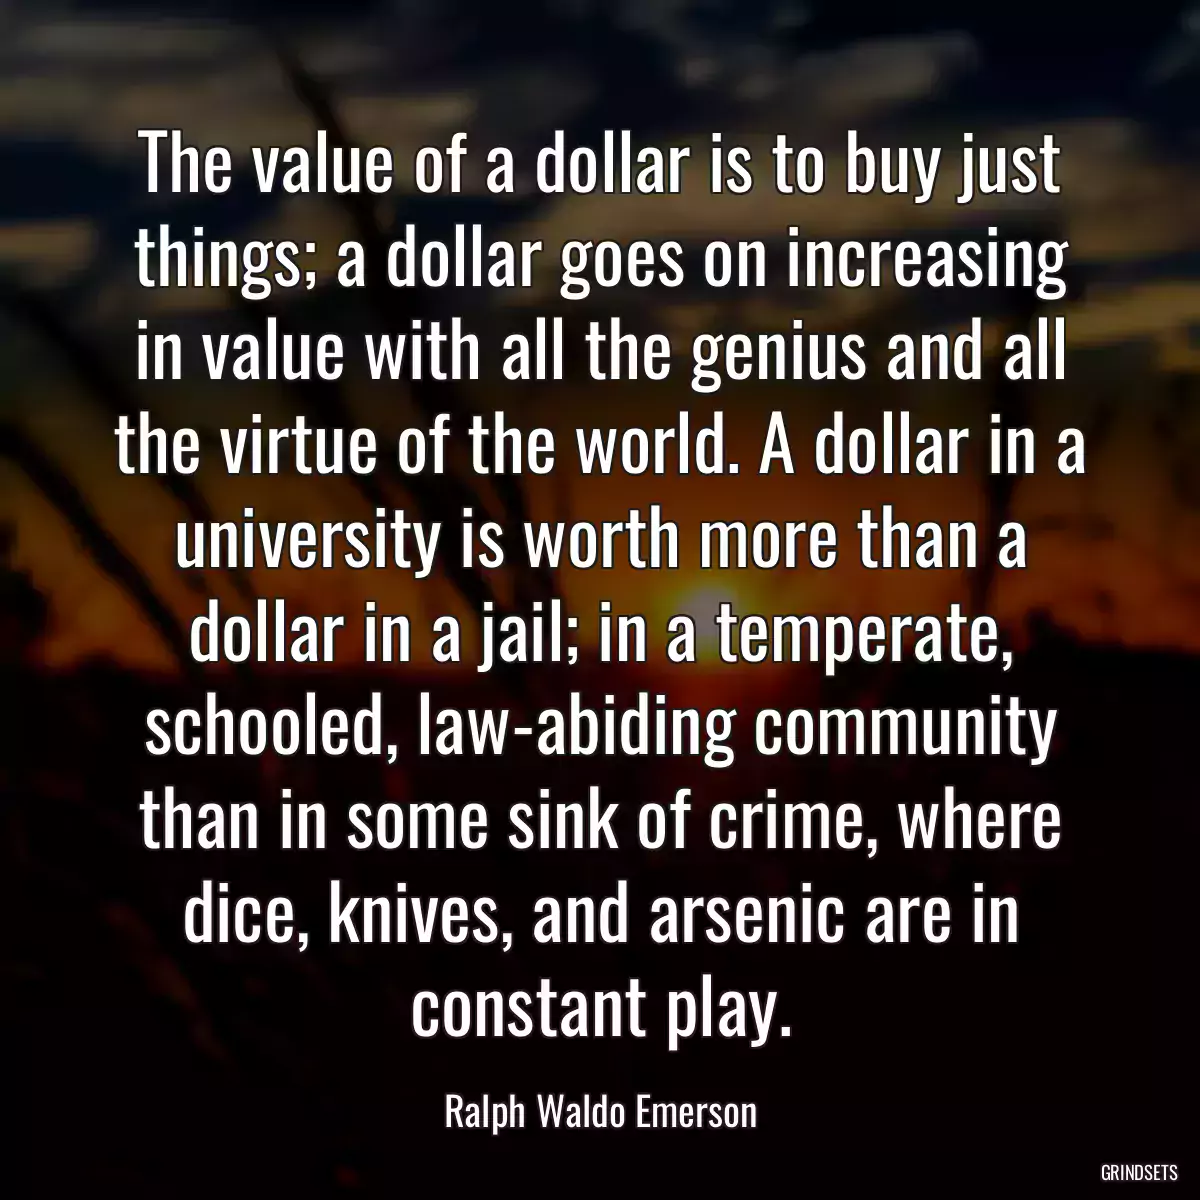 The value of a dollar is to buy just things; a dollar goes on increasing in value with all the genius and all the virtue of the world. A dollar in a university is worth more than a dollar in a jail; in a temperate, schooled, law-abiding community than in some sink of crime, where dice, knives, and arsenic are in constant play.